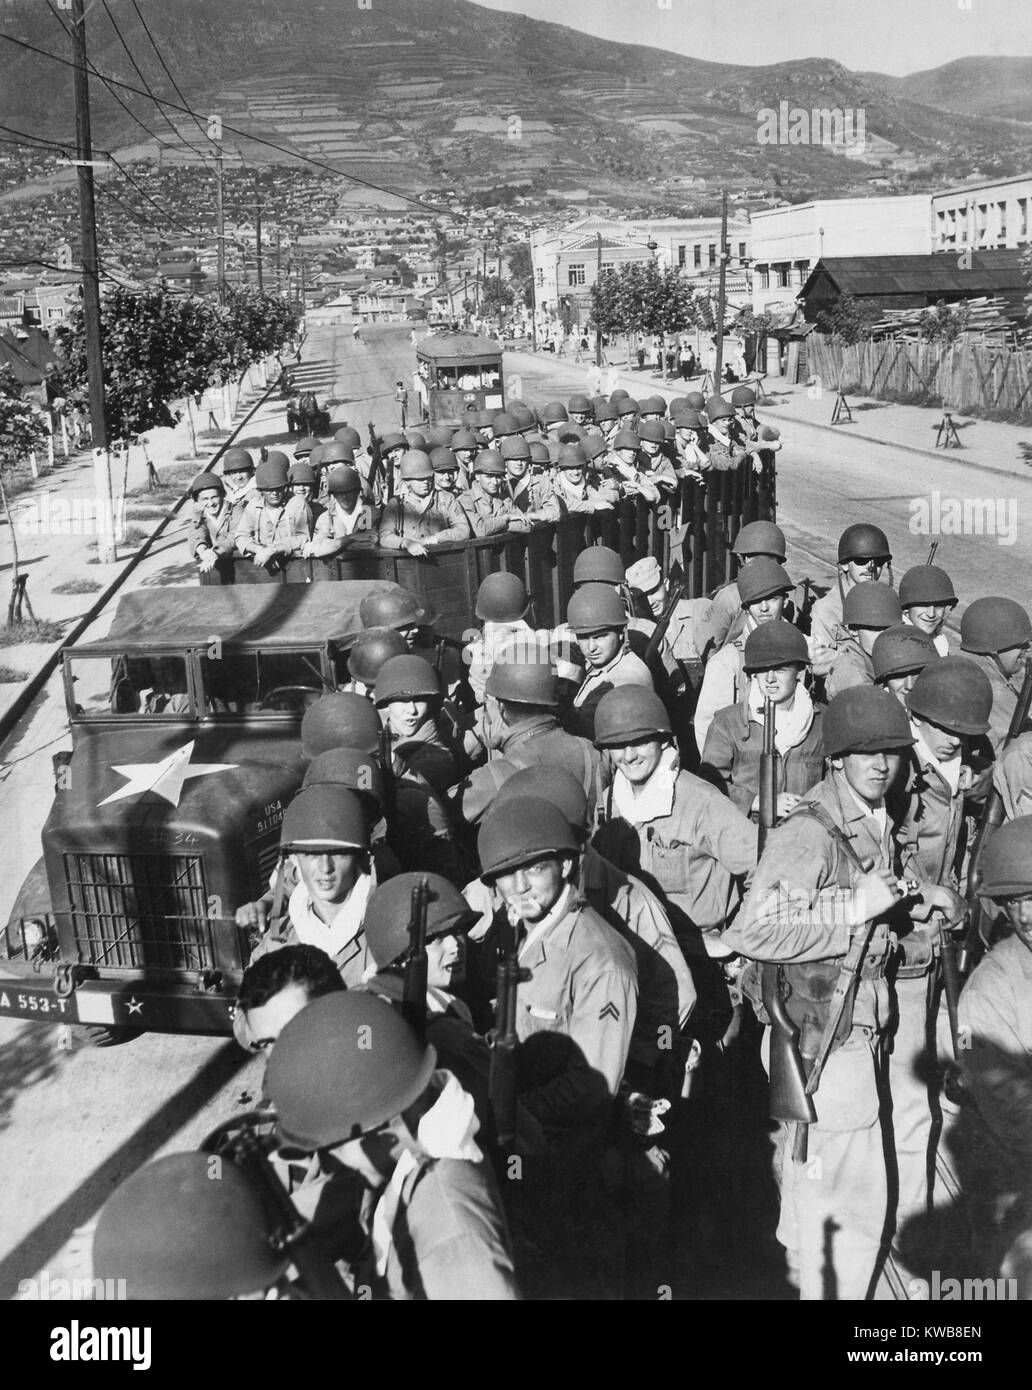 U.S. Marine troops arrived at the port of Pusan the day before, in trucks bound for the fighting on the Pusan Perimeter. Aug. 3, 1950. Korean War, 1950-53. (BSLOC 2014 11 12) Stock Photo